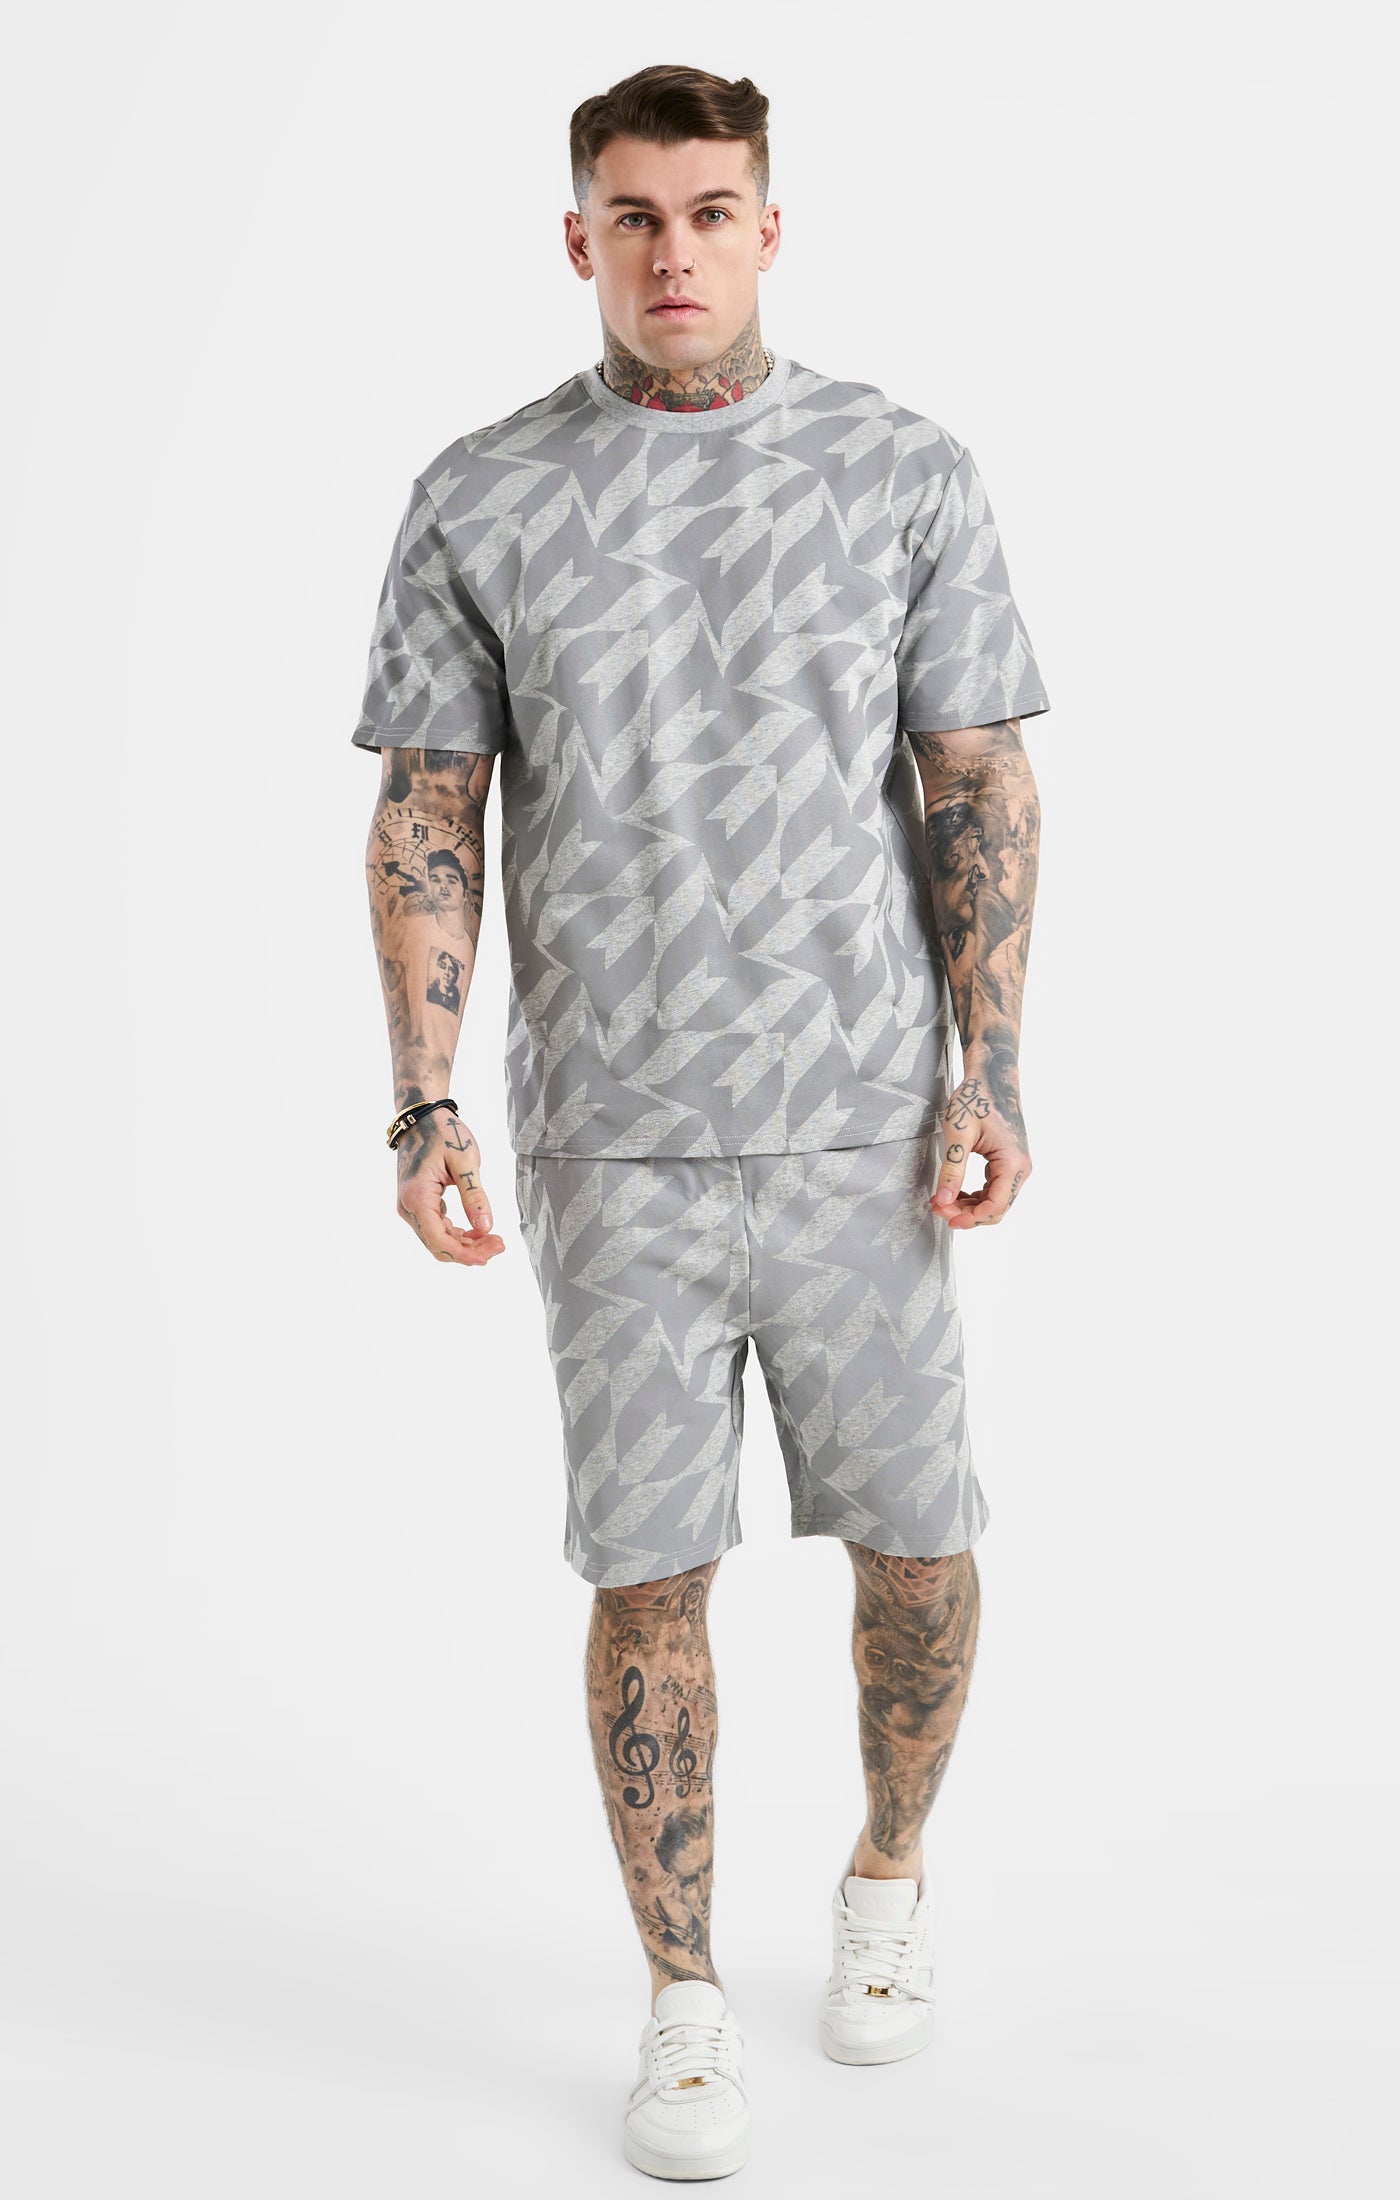 Load image into Gallery viewer, Messi x SikSilk Silver Print Tee - Grey Marl (3)